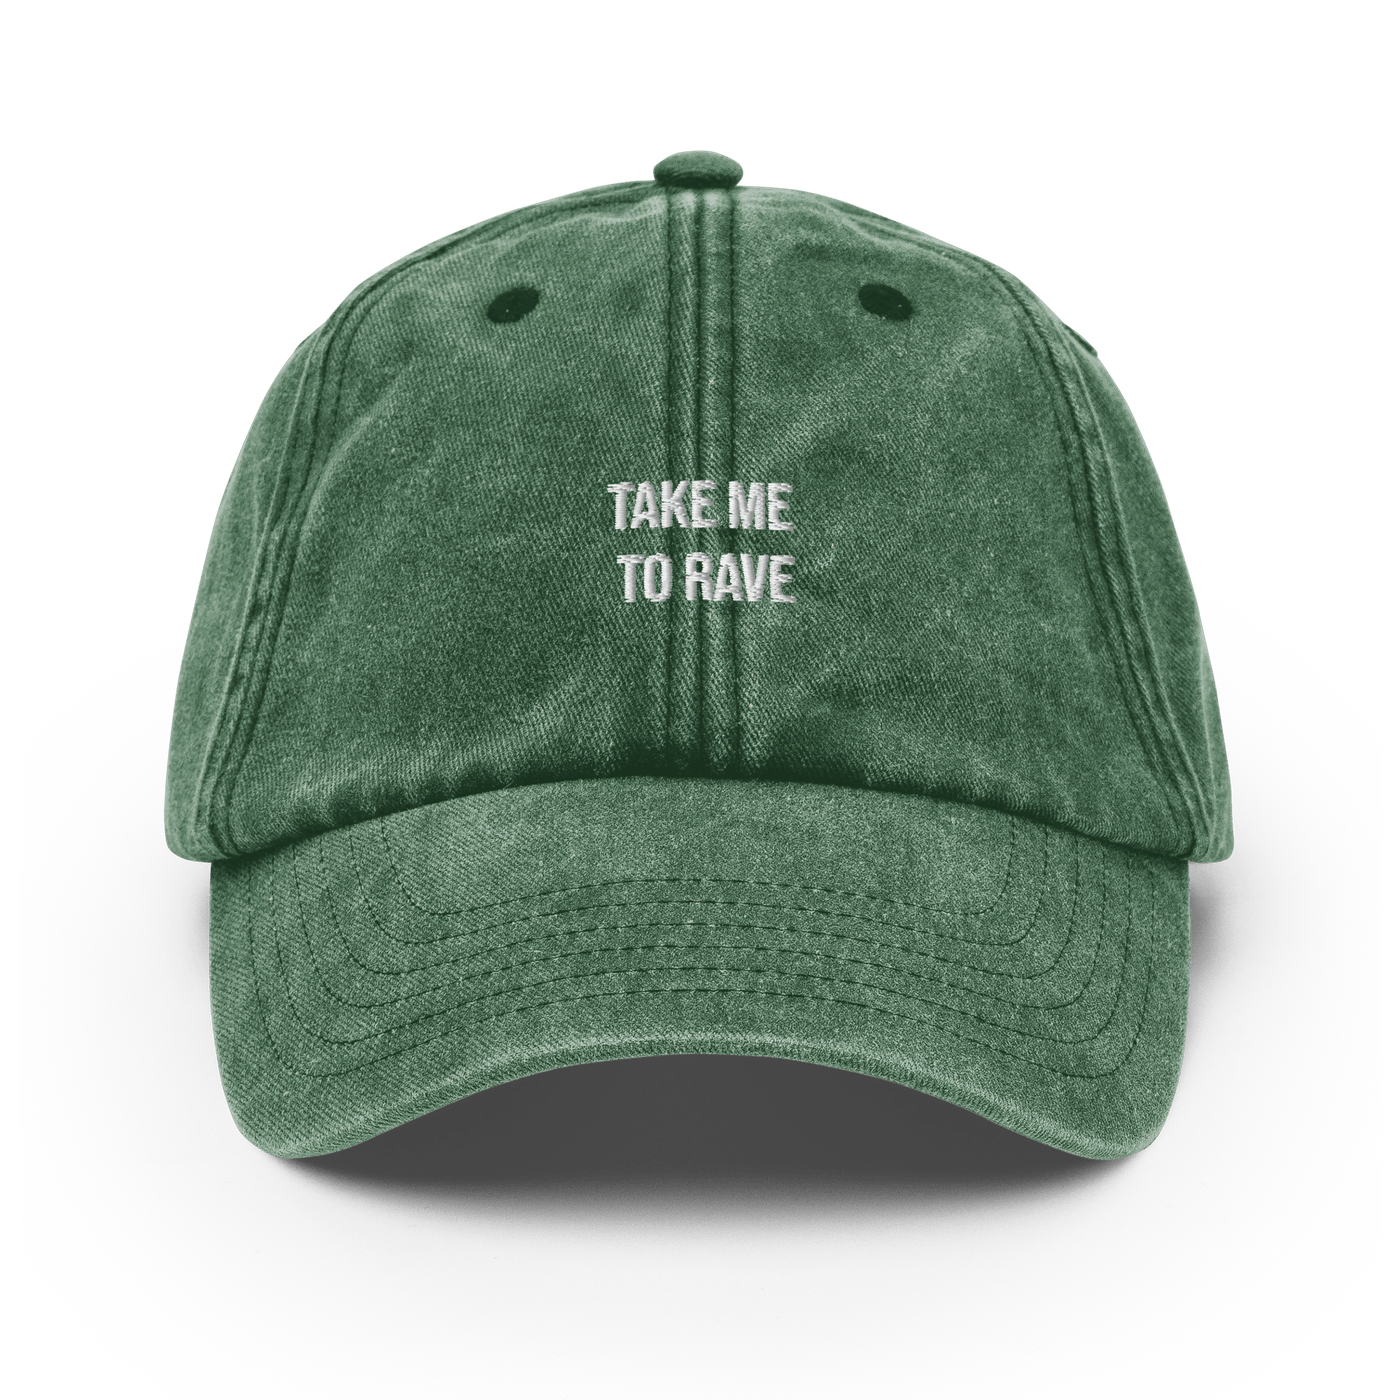 Take me to rave Vintage Hat - Vintage Bottle Green - - Just Another Cap Store